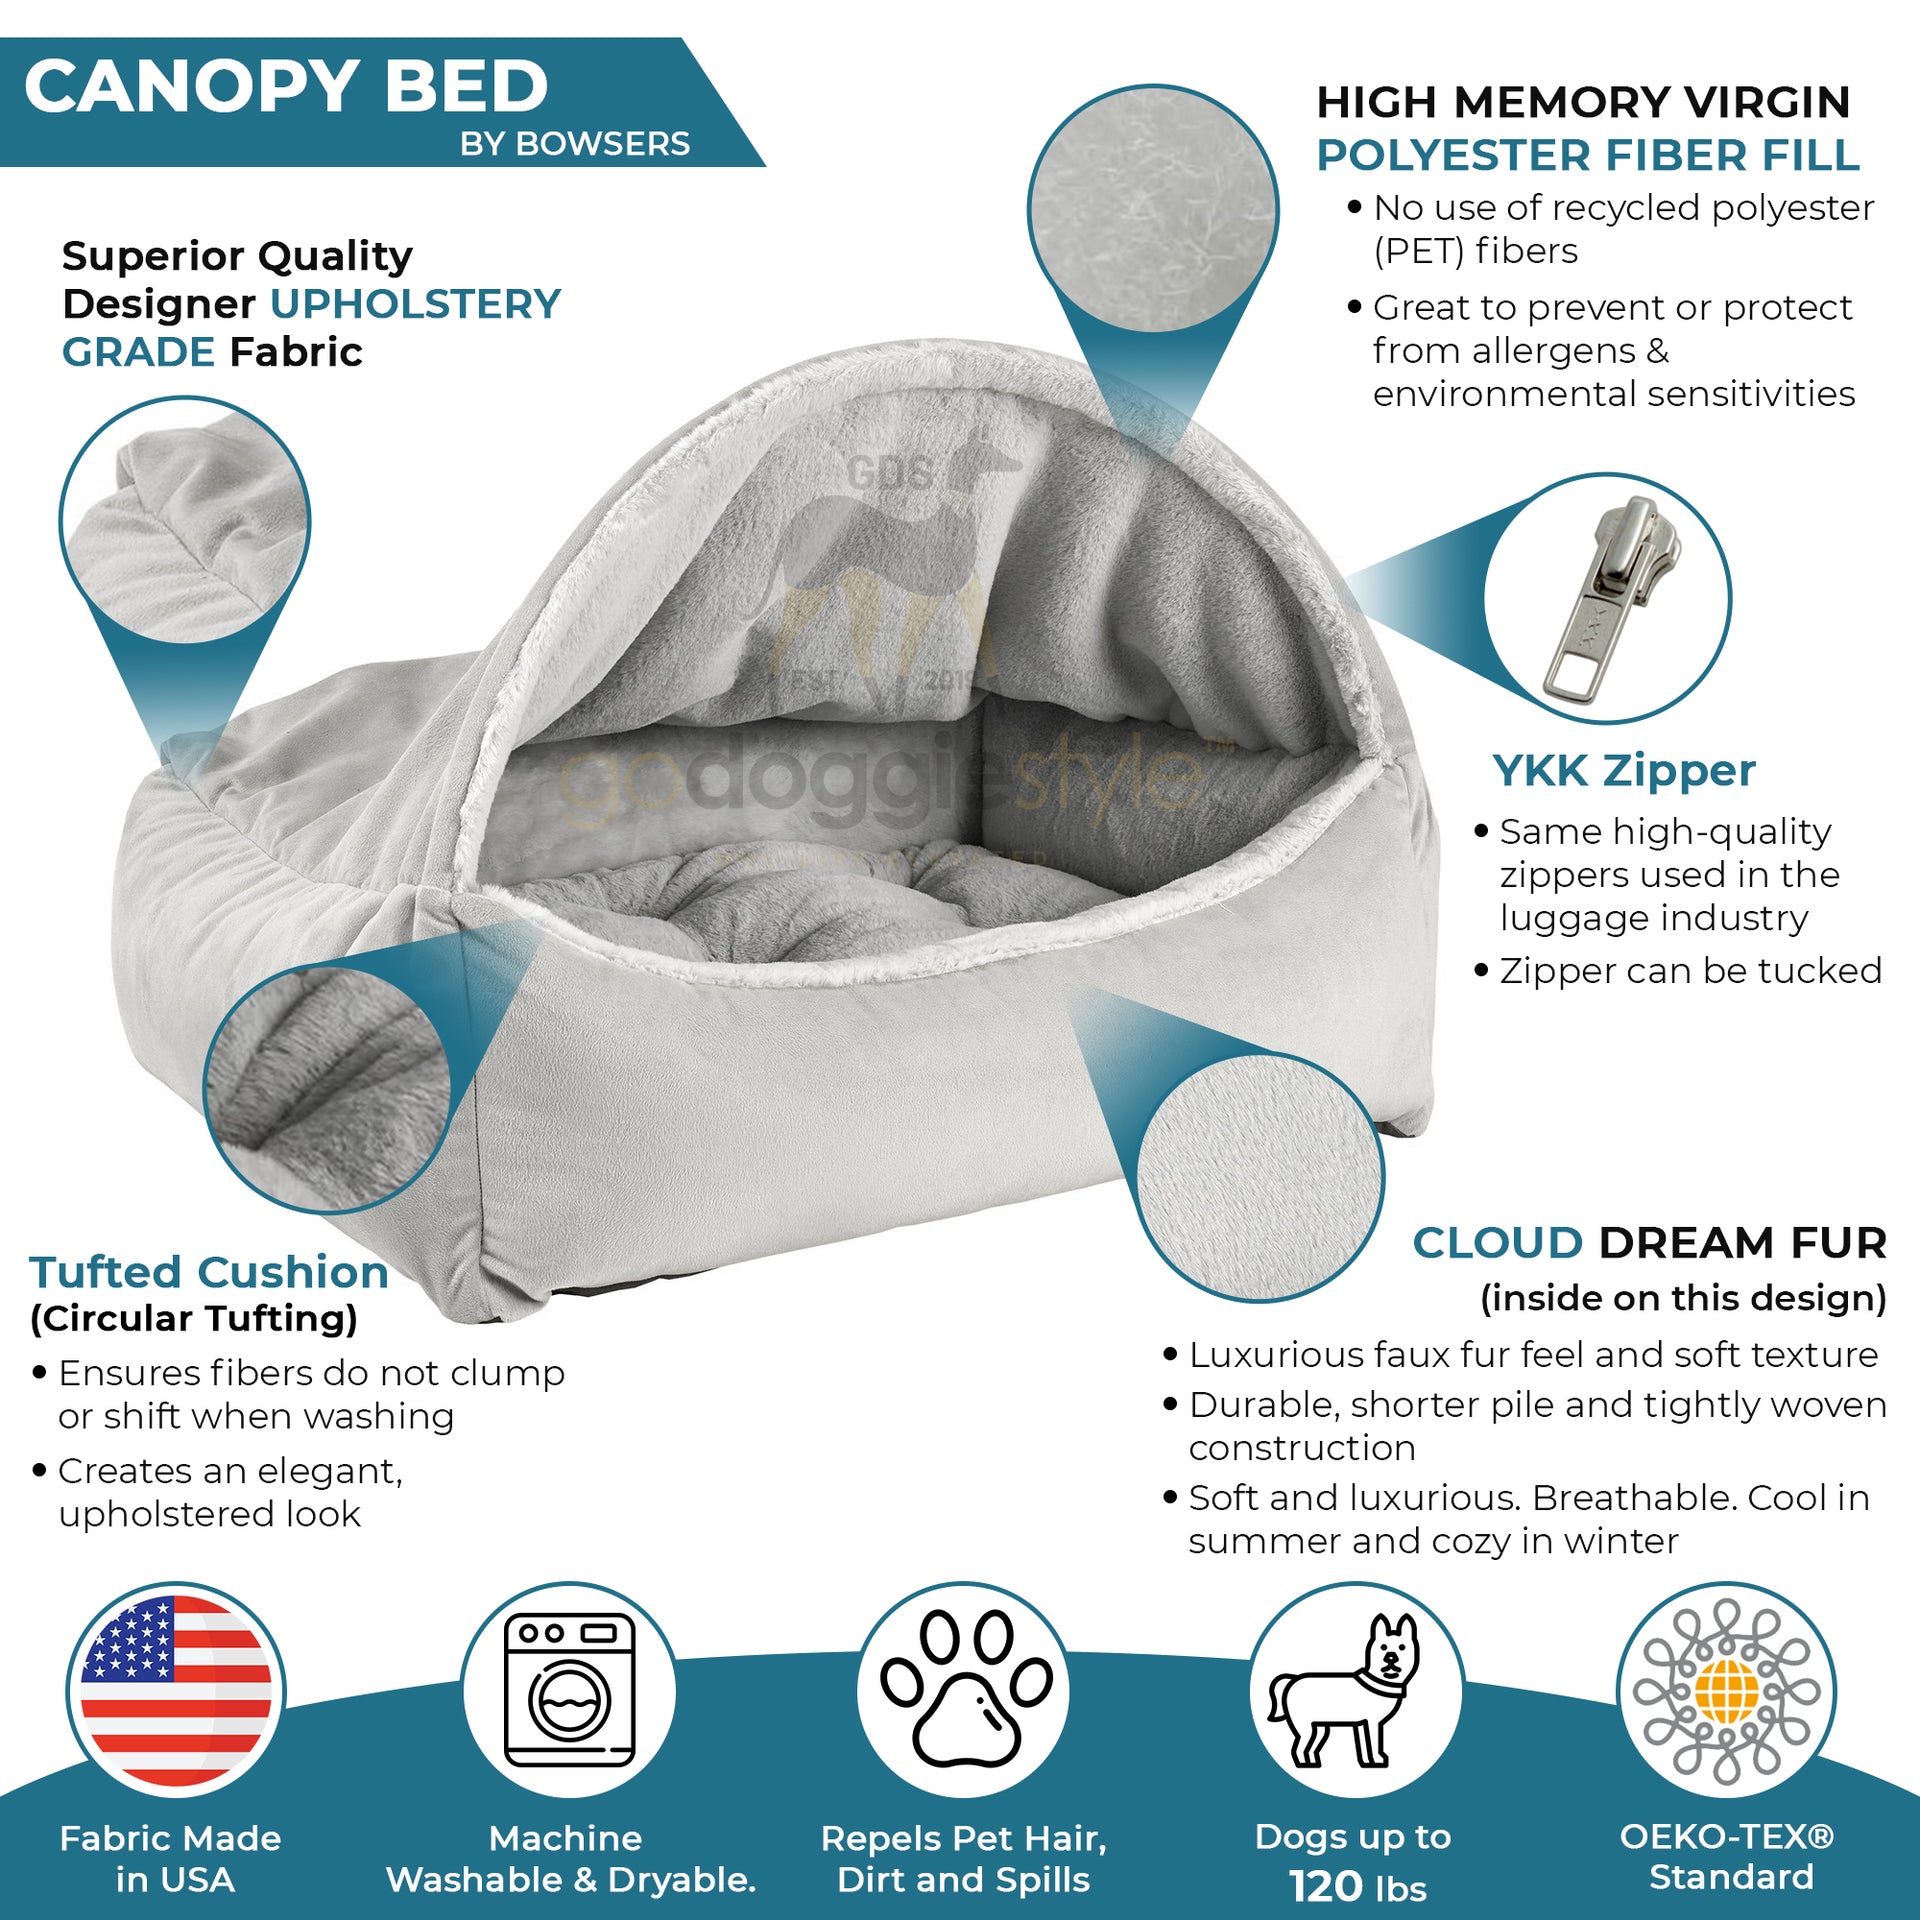 Canopy Bed Info Graphic